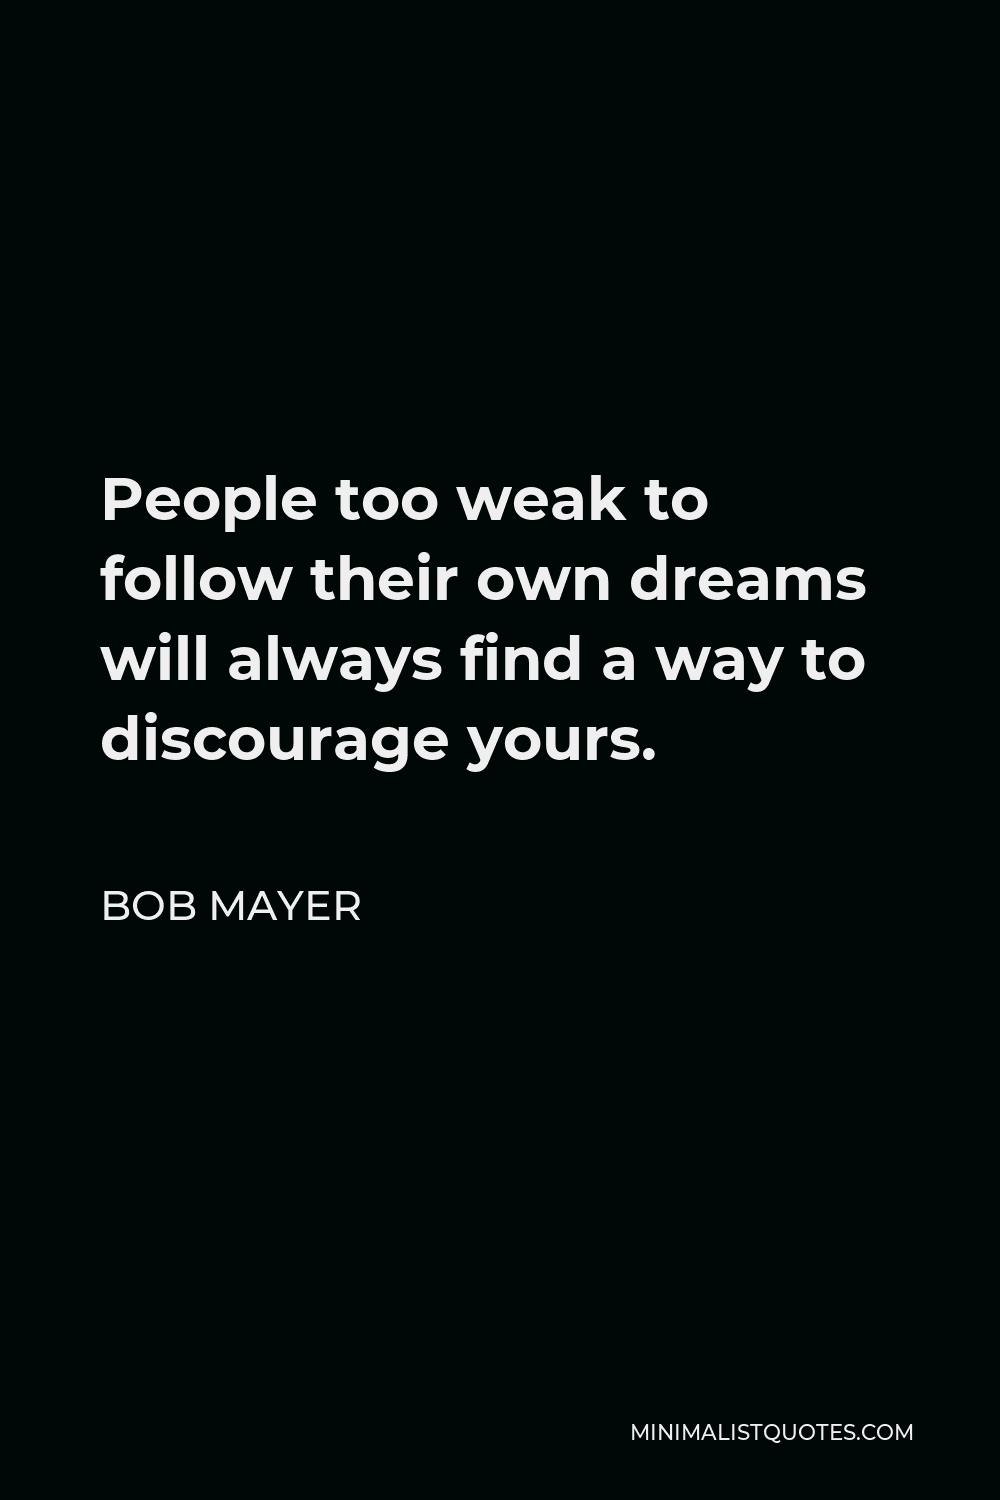 Bob Mayer Quote - People too weak to follow their own dreams will always find a way to discourage yours.